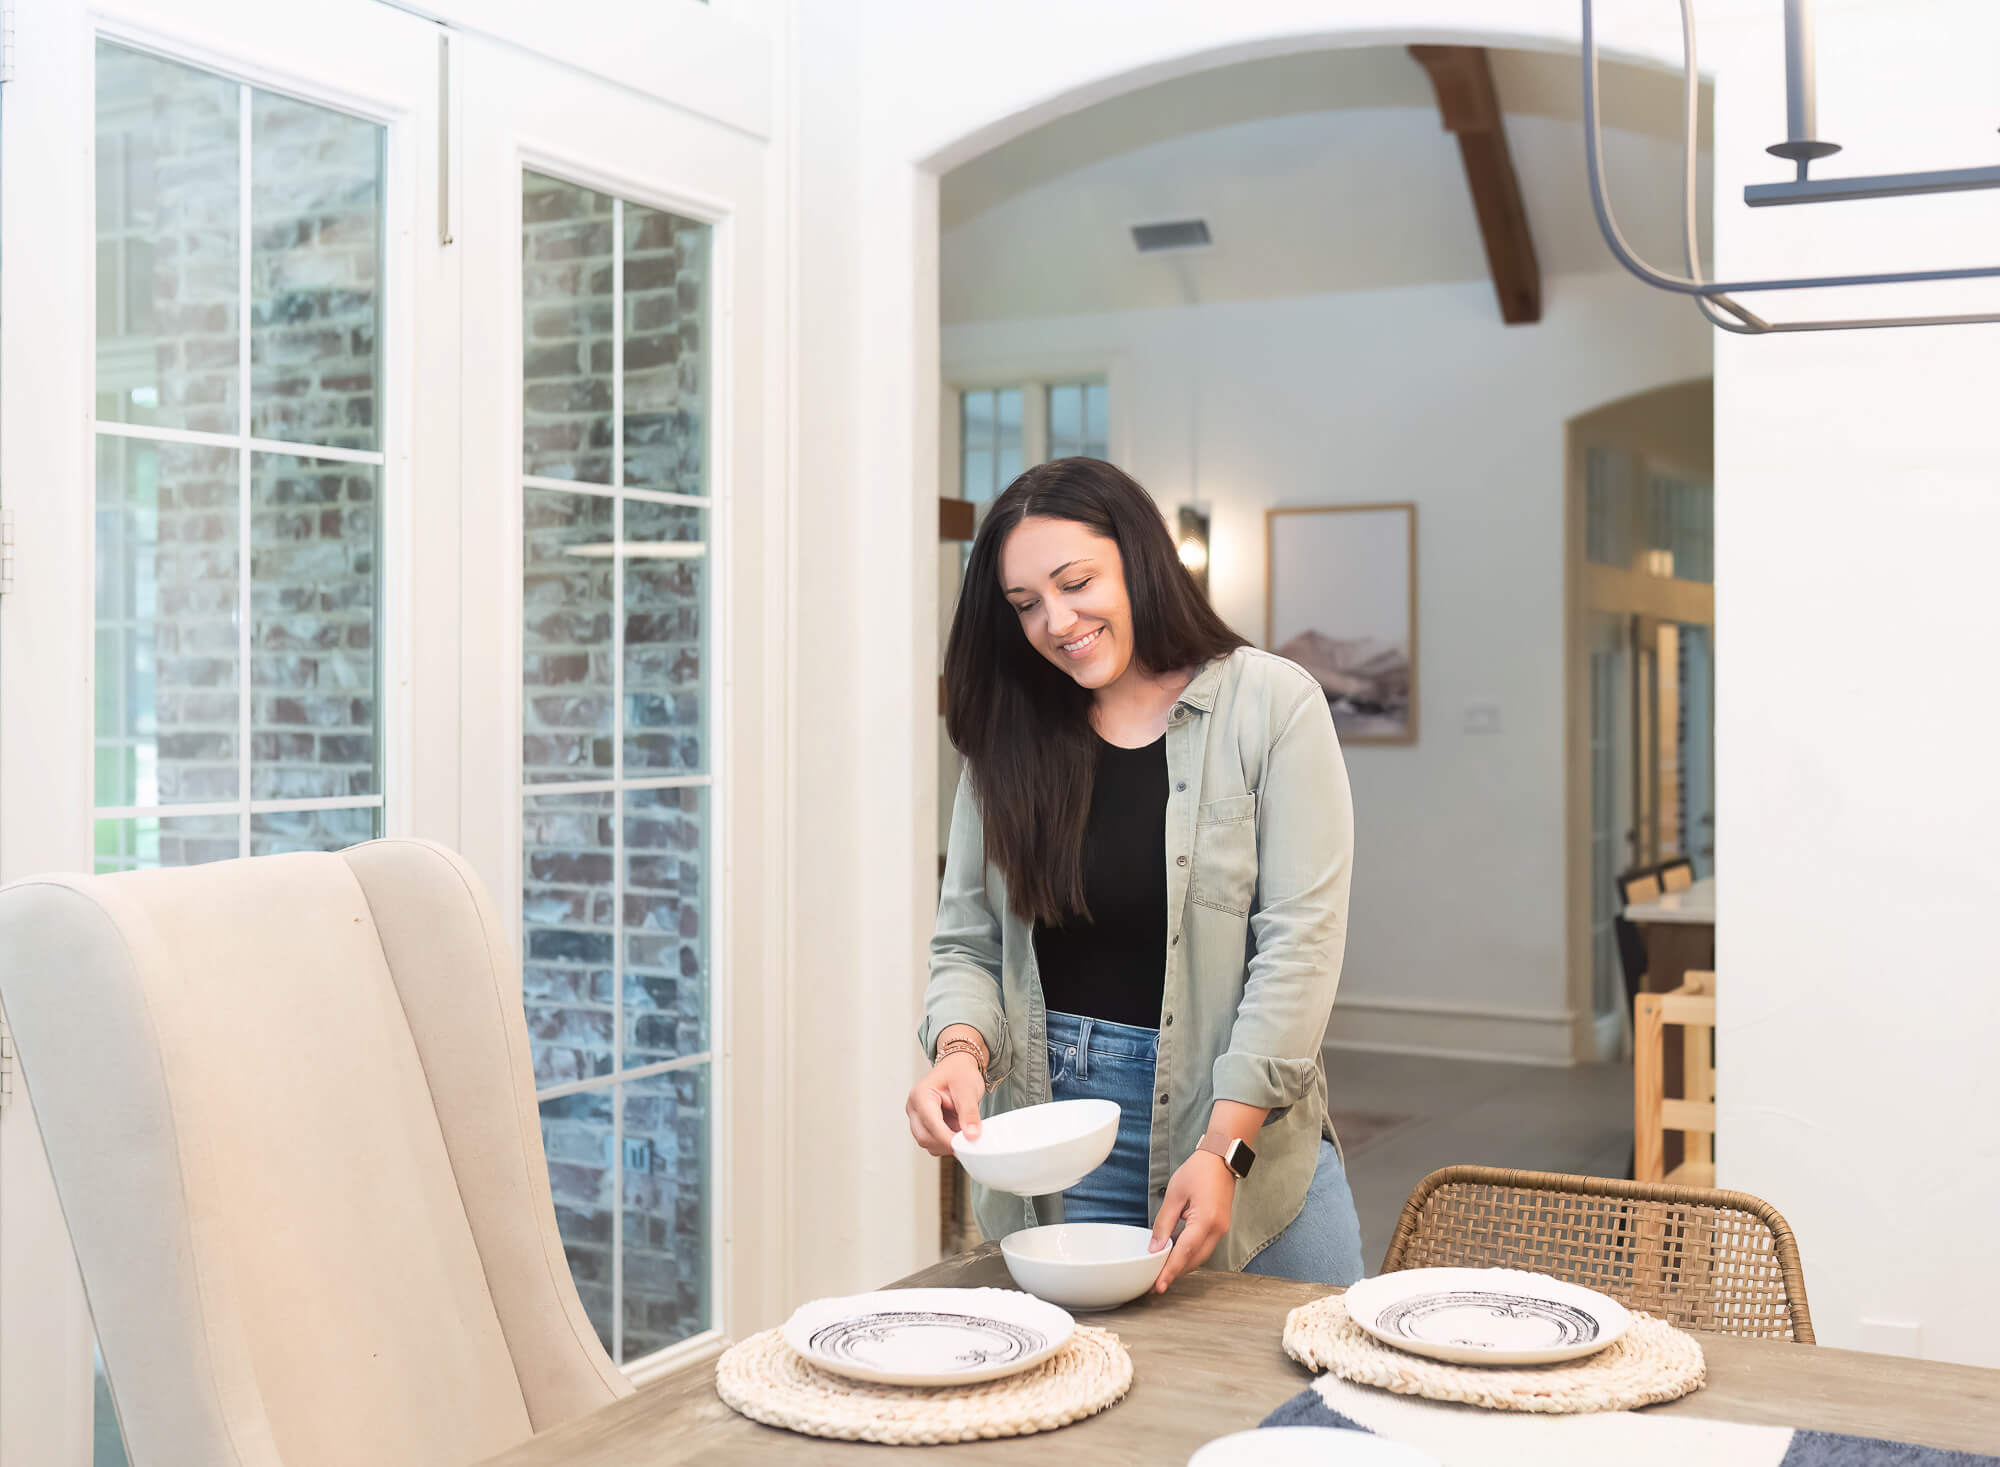 woman staging a dining table for an interior design team brnading session